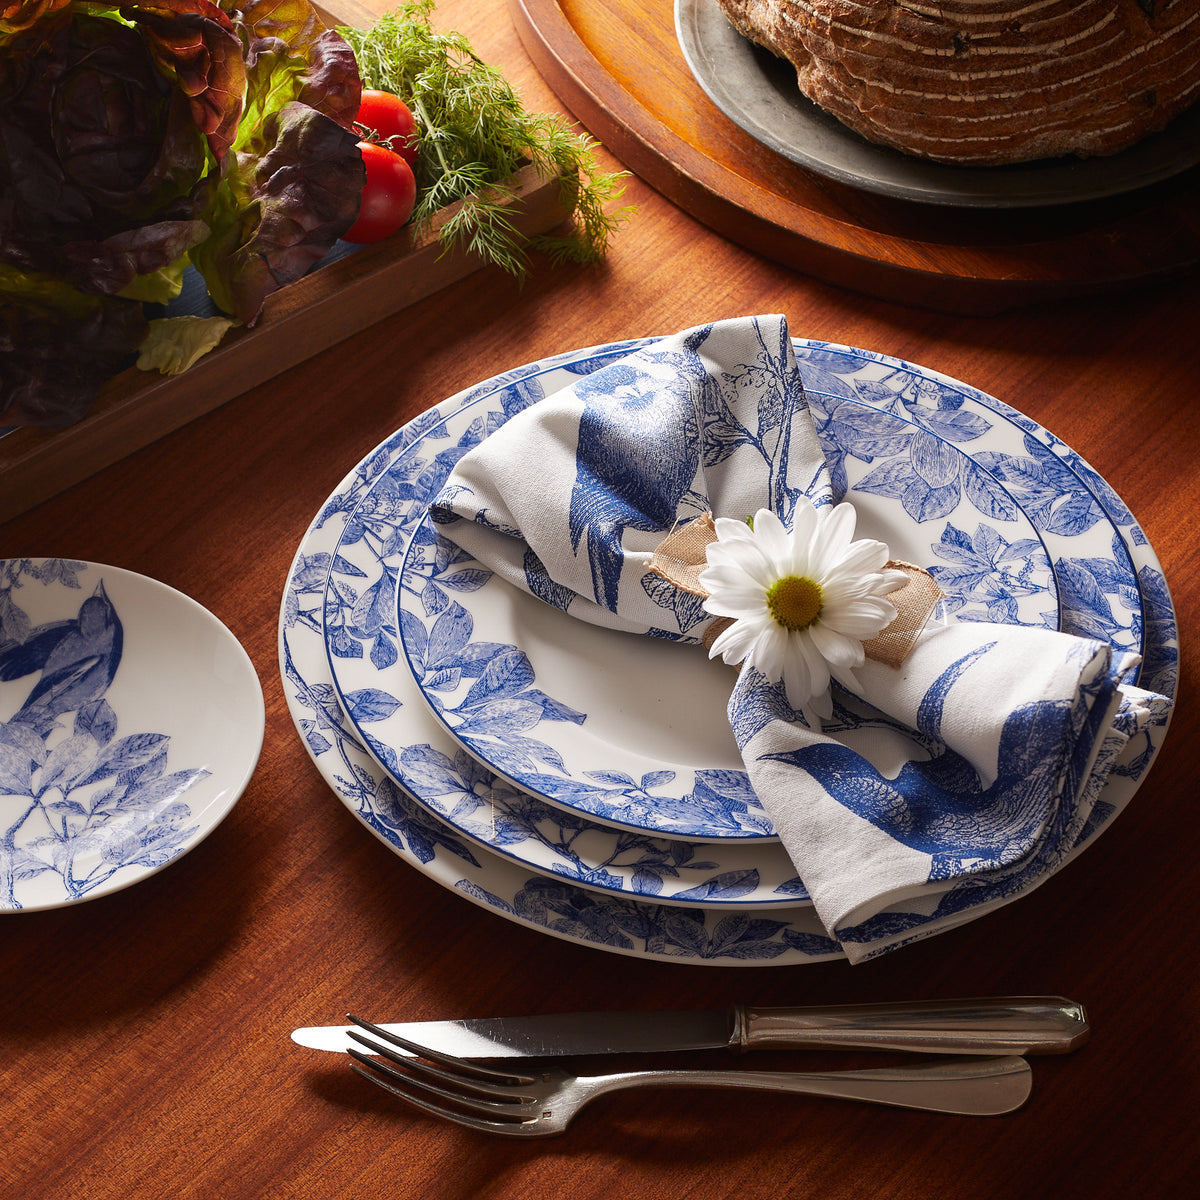 Elegant dining setup with Arbor Blue Rimmed Dinner dinnerware from Caskata Artisanal Home, a folded napkin with a daisy, silverware on a wooden table, and a salad on the side.